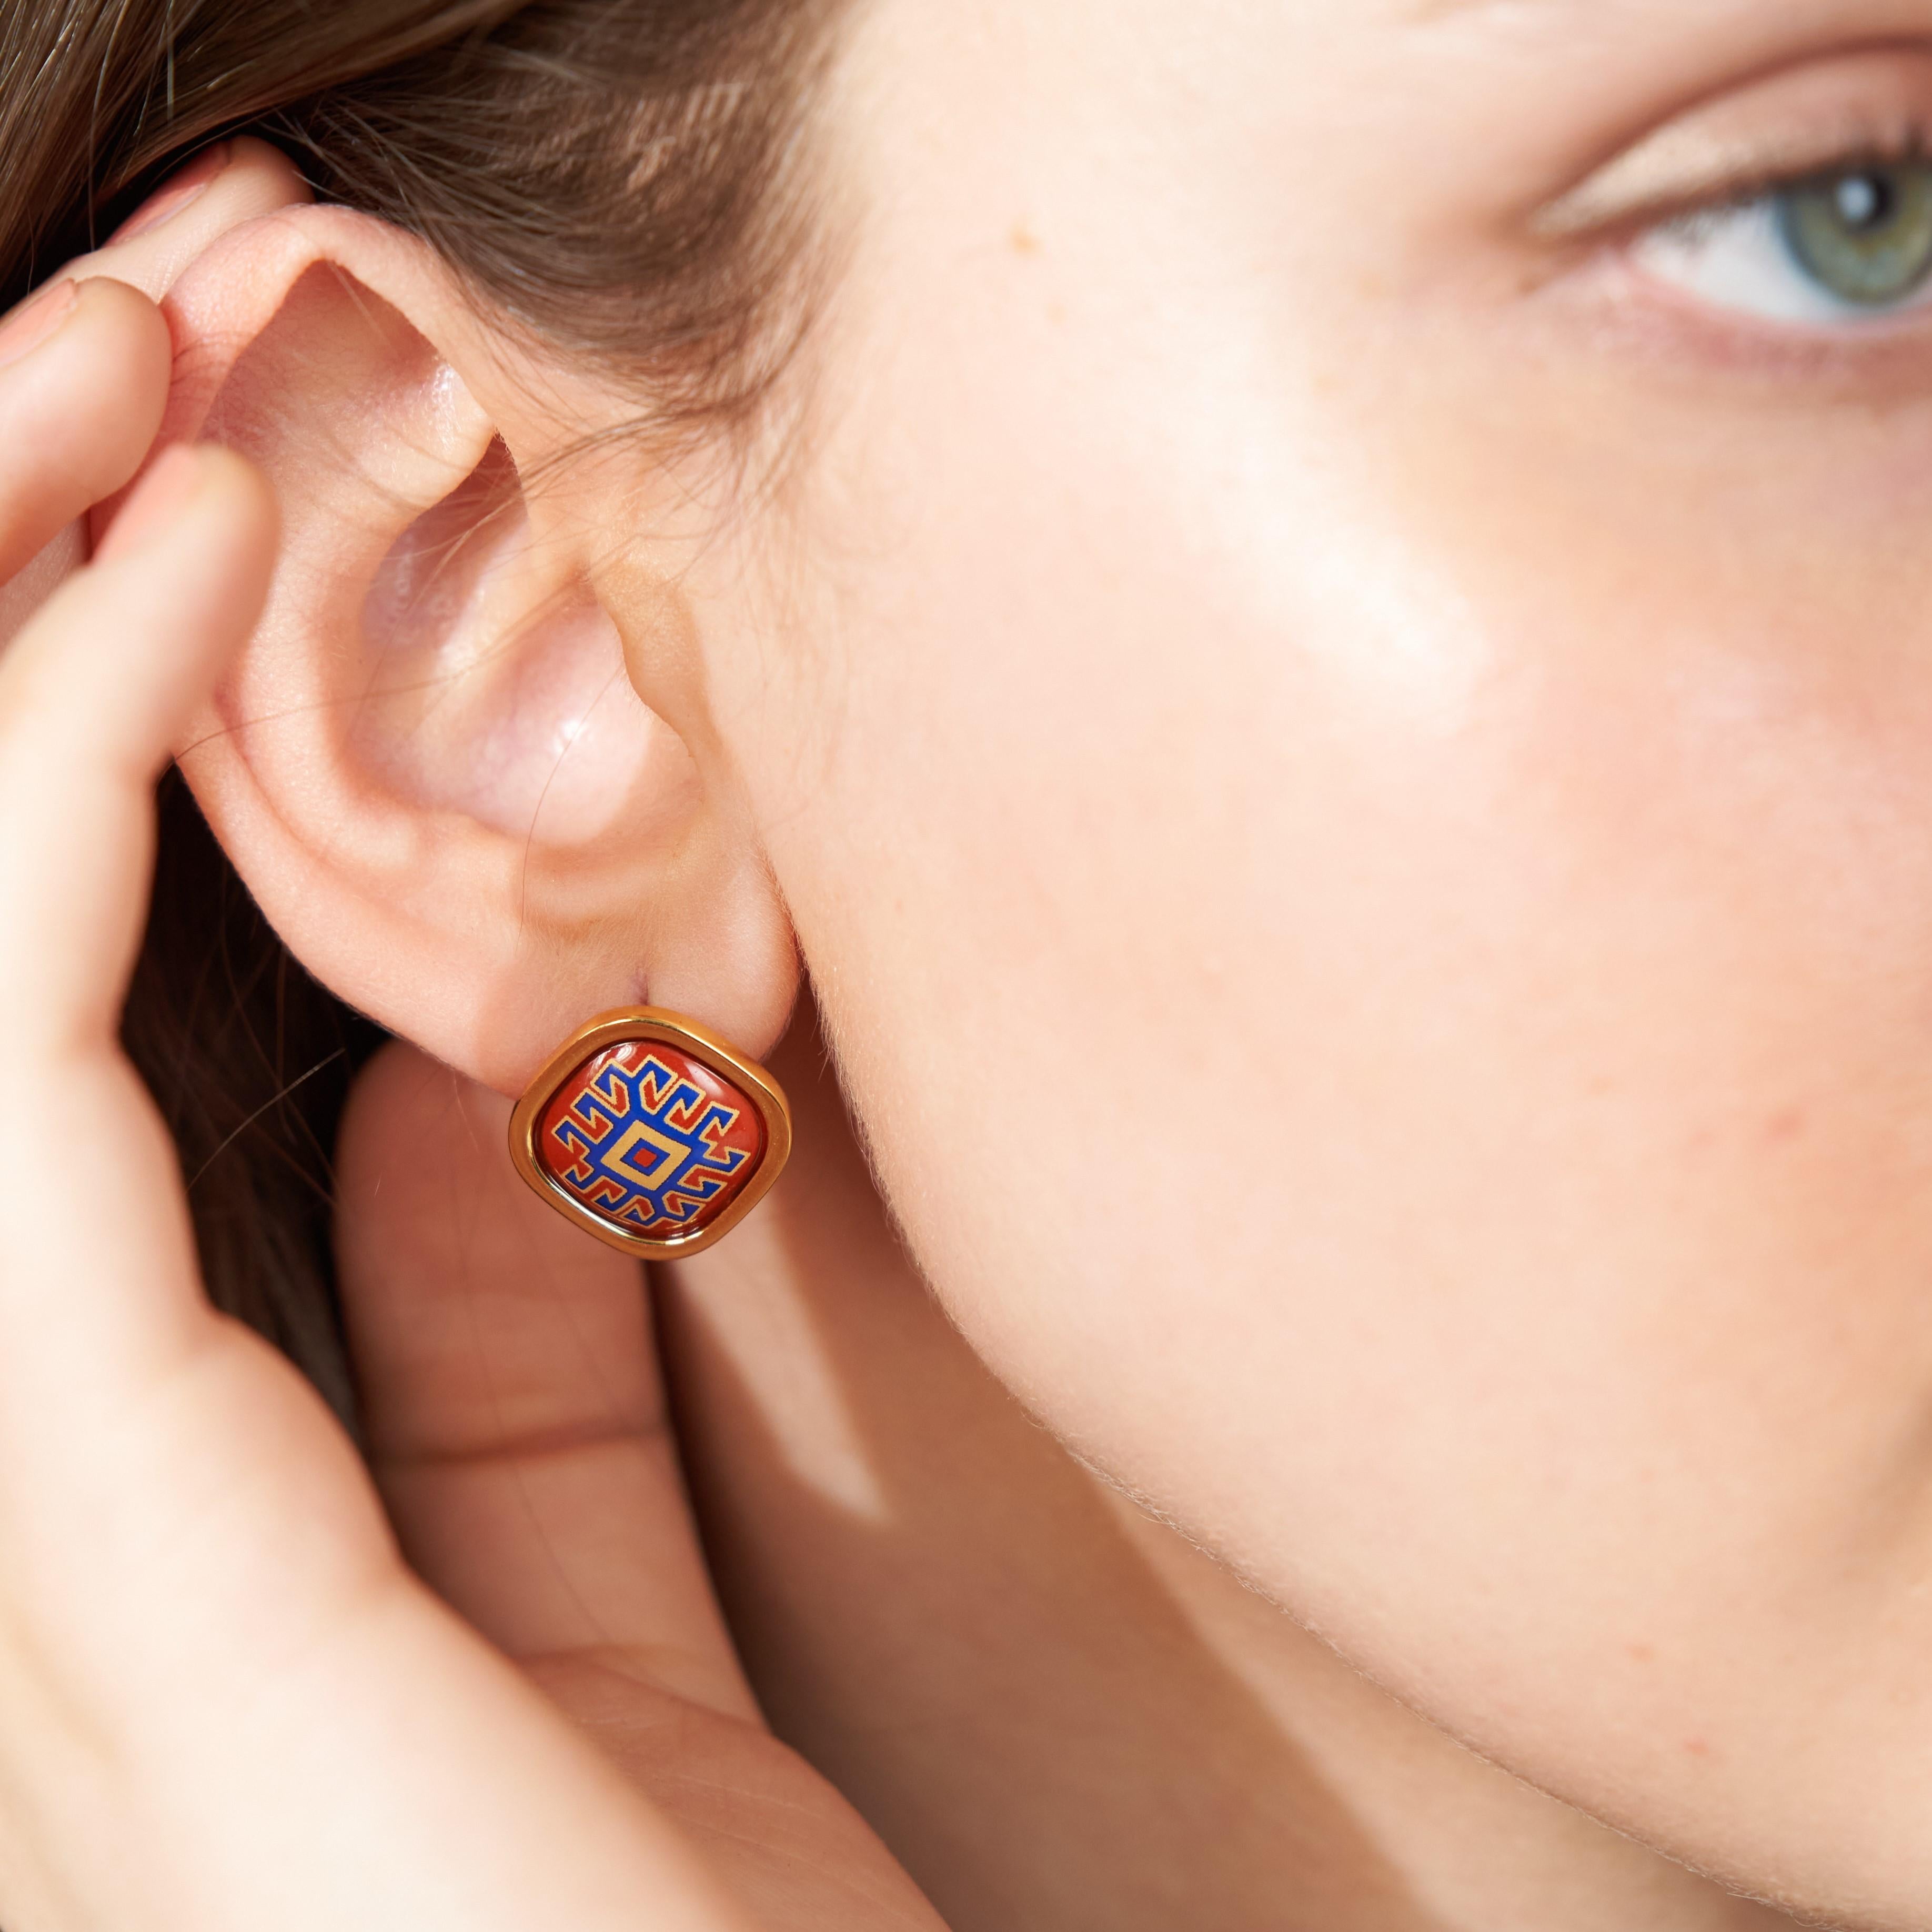 Indulge in exquisite style with our 18k gold-plated stainless steel earrings. Hand-painted with vibrant fire enamel, these hypoallergenic earrings are a true masterpiece of luxury and beauty. Shop now and elevate your look to new heights!